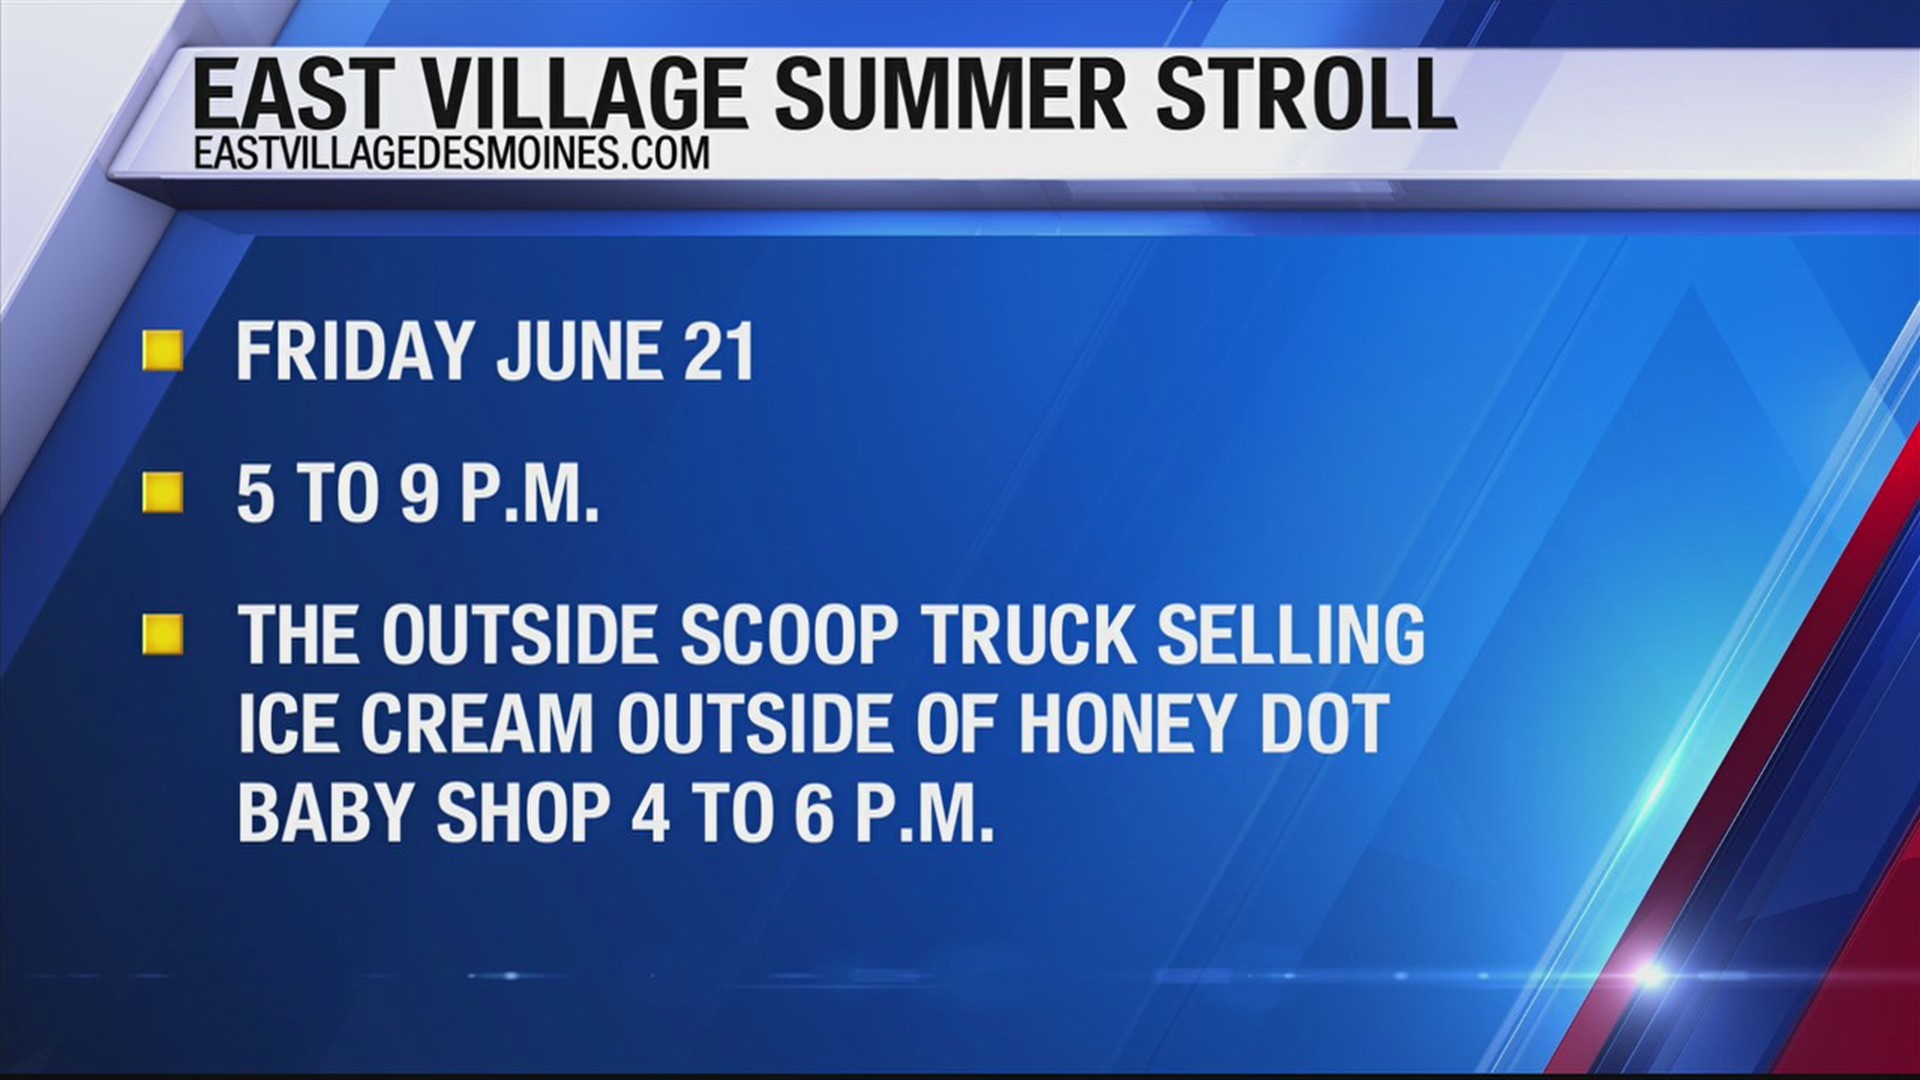 More than 30 businesses are coming together to celebrate the longest day of the year for the inaugural East Village Summer Stroll.